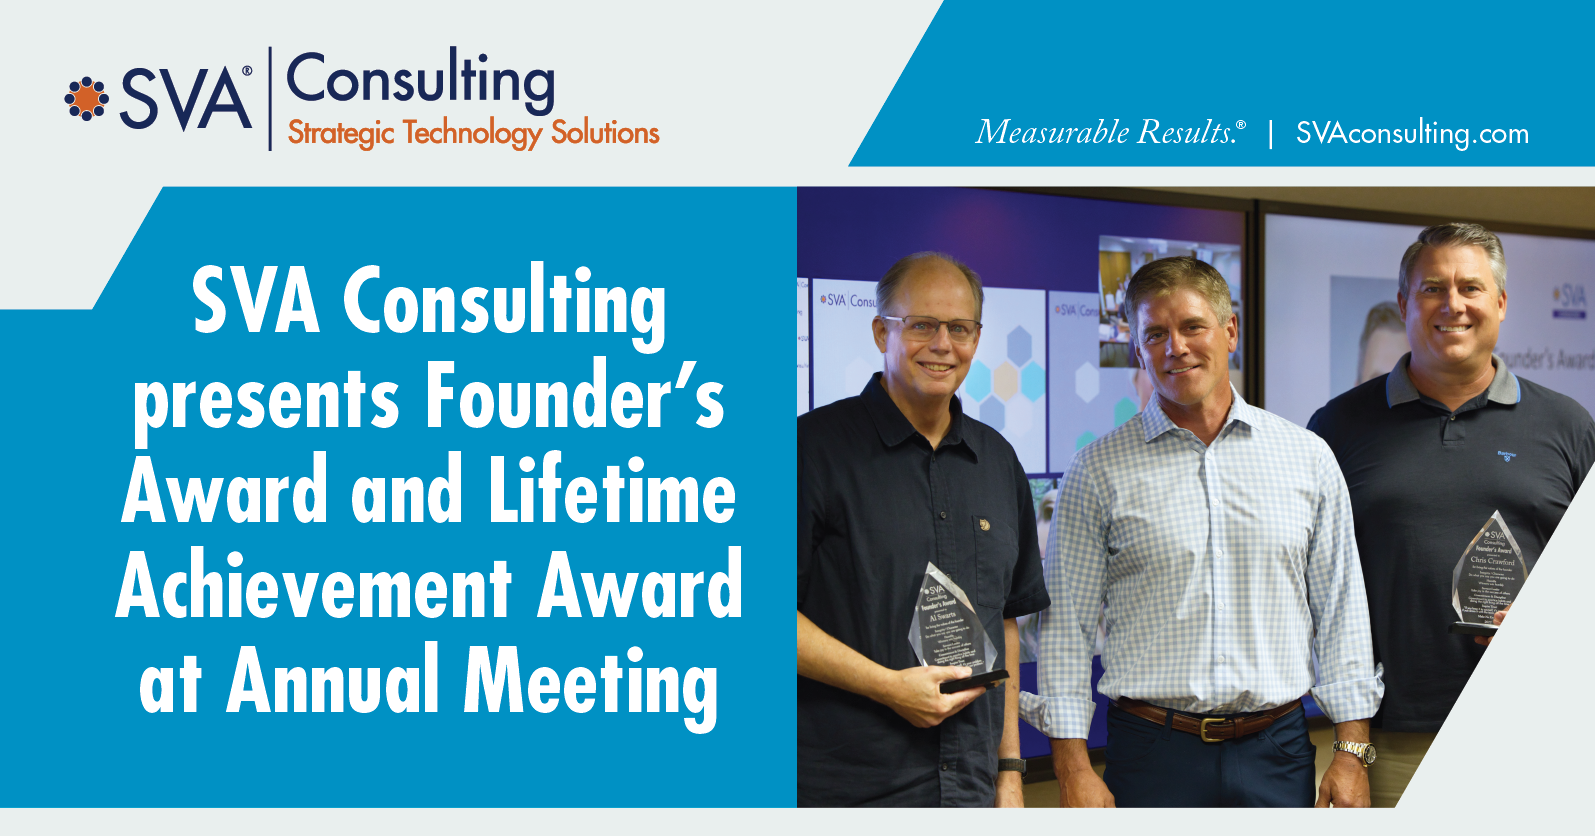 SVA Consulting Presents Founder’s Award and Lifetime Achievement Award at Annual Meeting